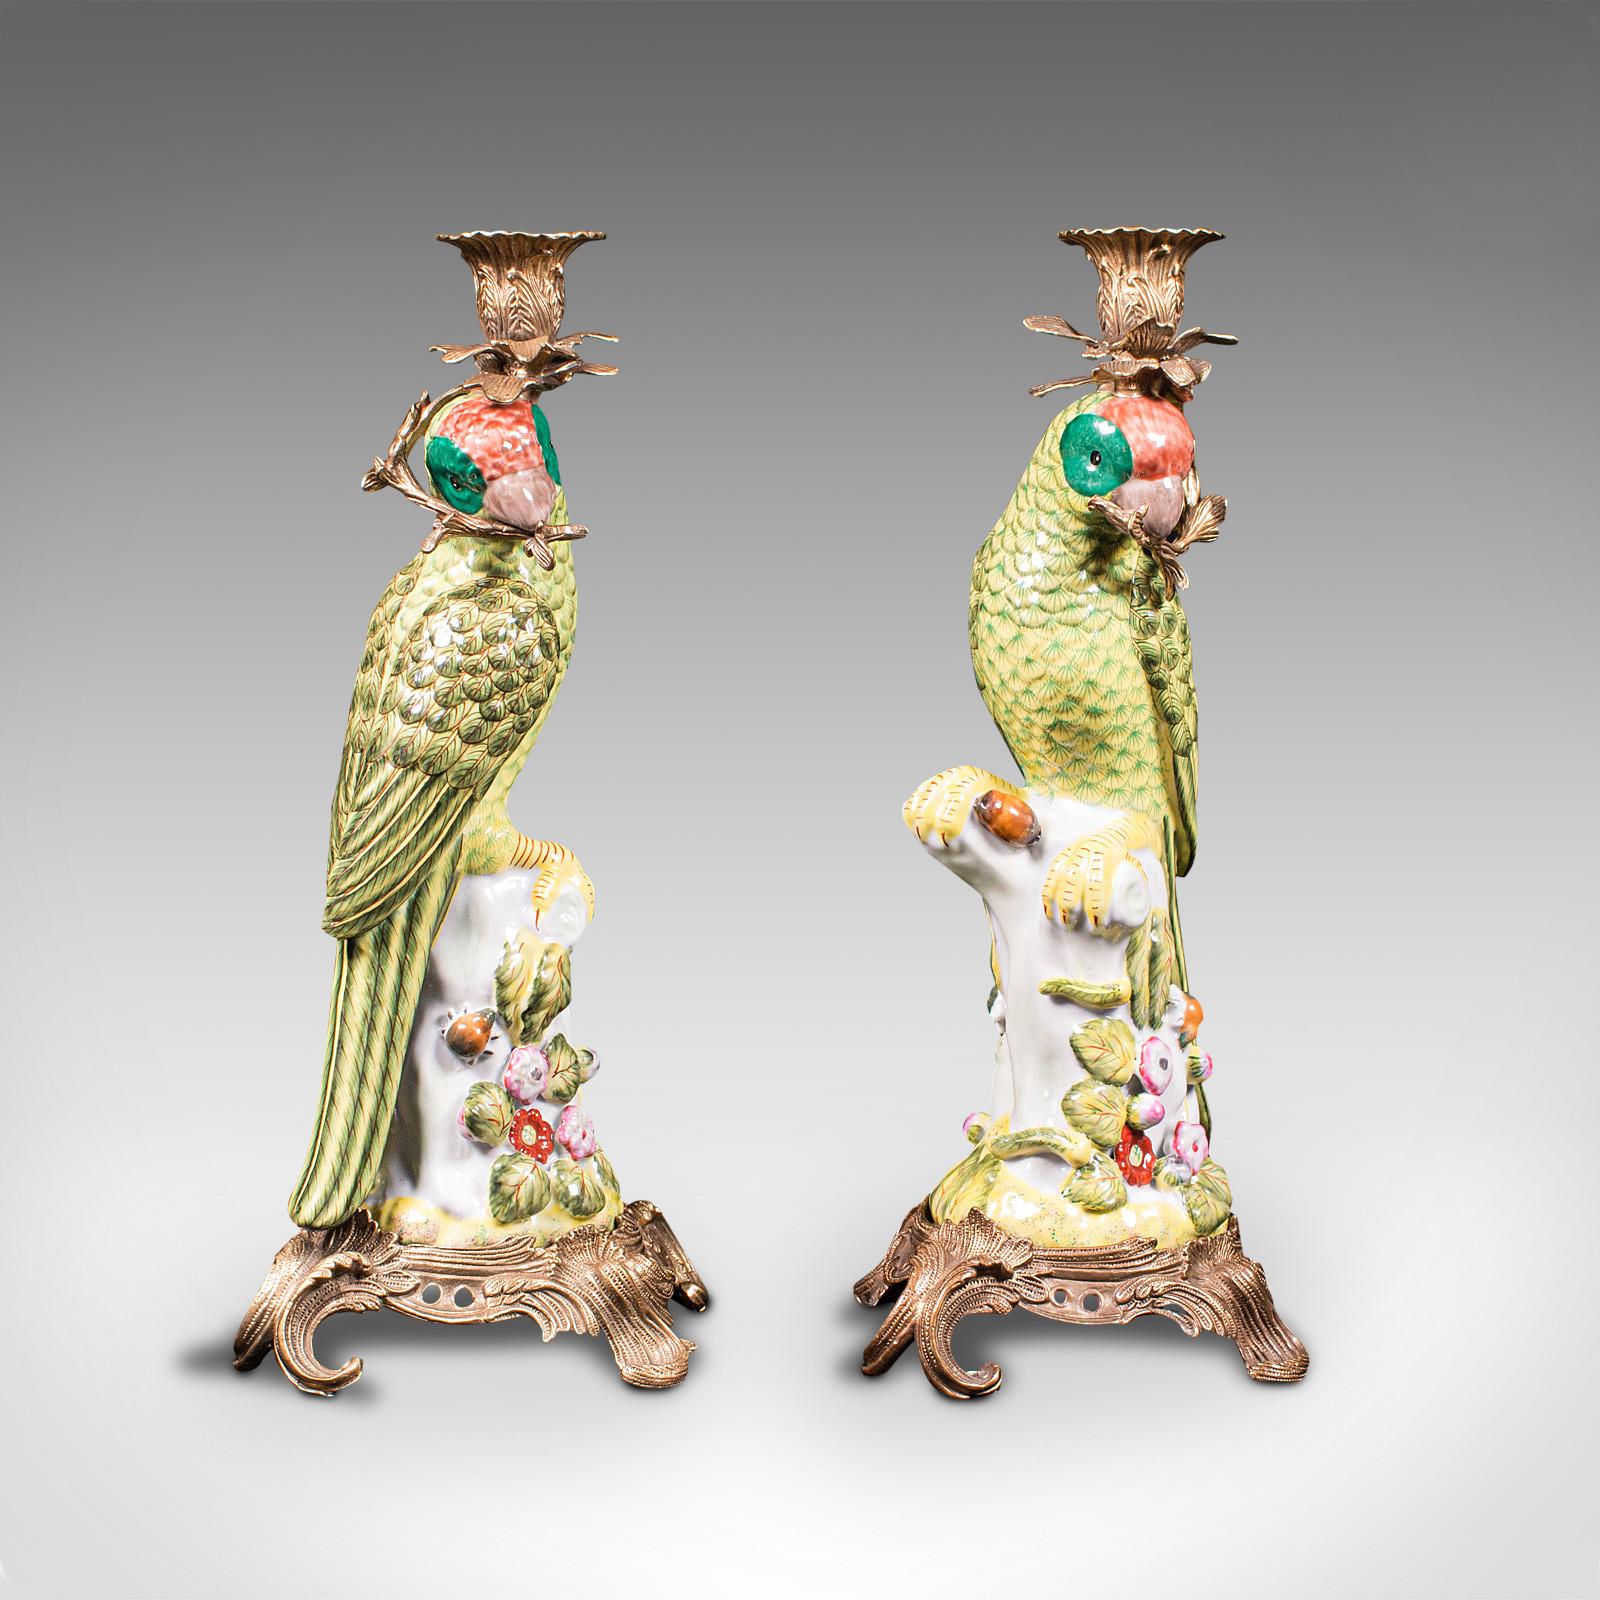 This is a fine pair of vintage decorative candlesticks. An Oriental, ceramic parakeet figure as a candelabra, dating to the late 20th century, circa 1980.

Rich in colour and character, the pair present beautifully
Displaying a desirable aged